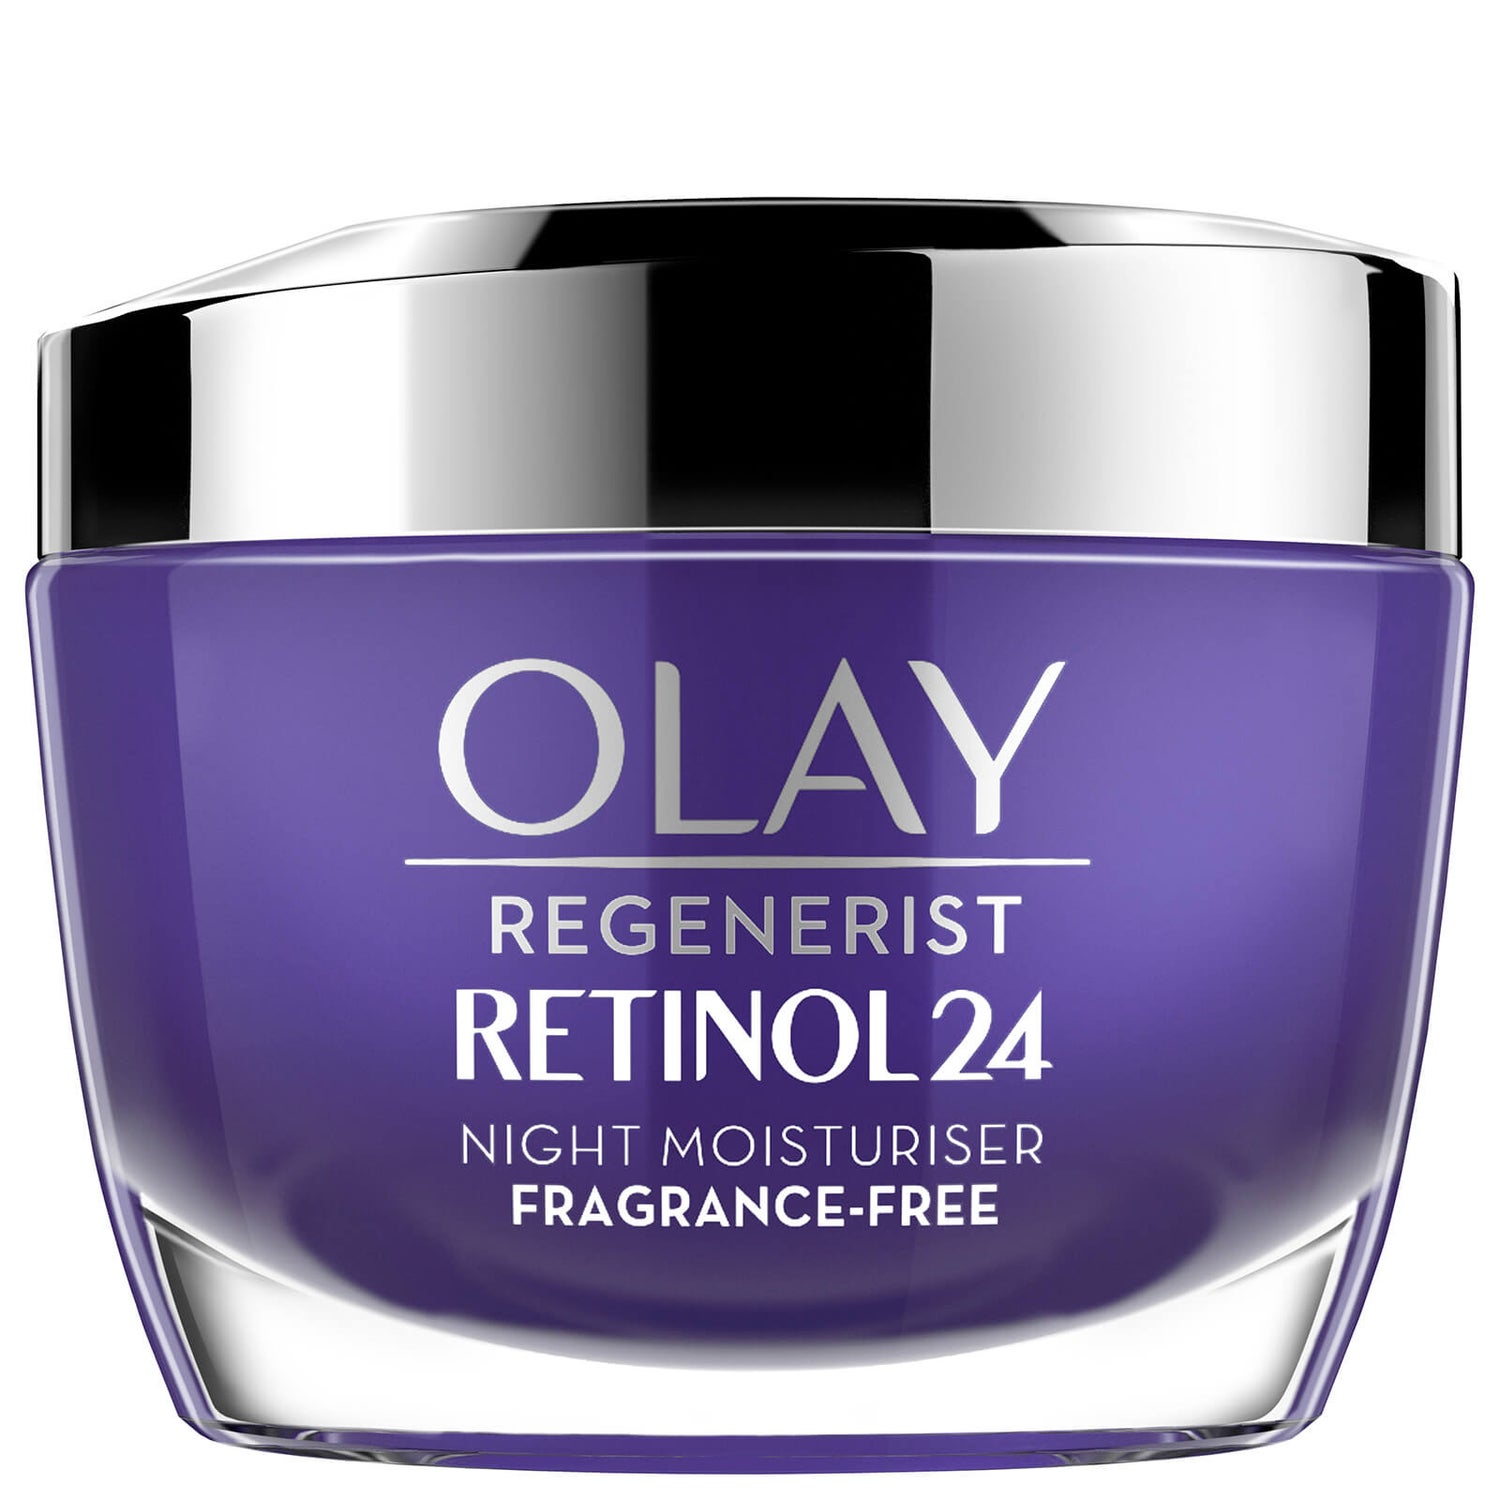 Olay Retinol 24 Fragrance Free Night Face Cream for Smooth and Glowing Skin 50ml